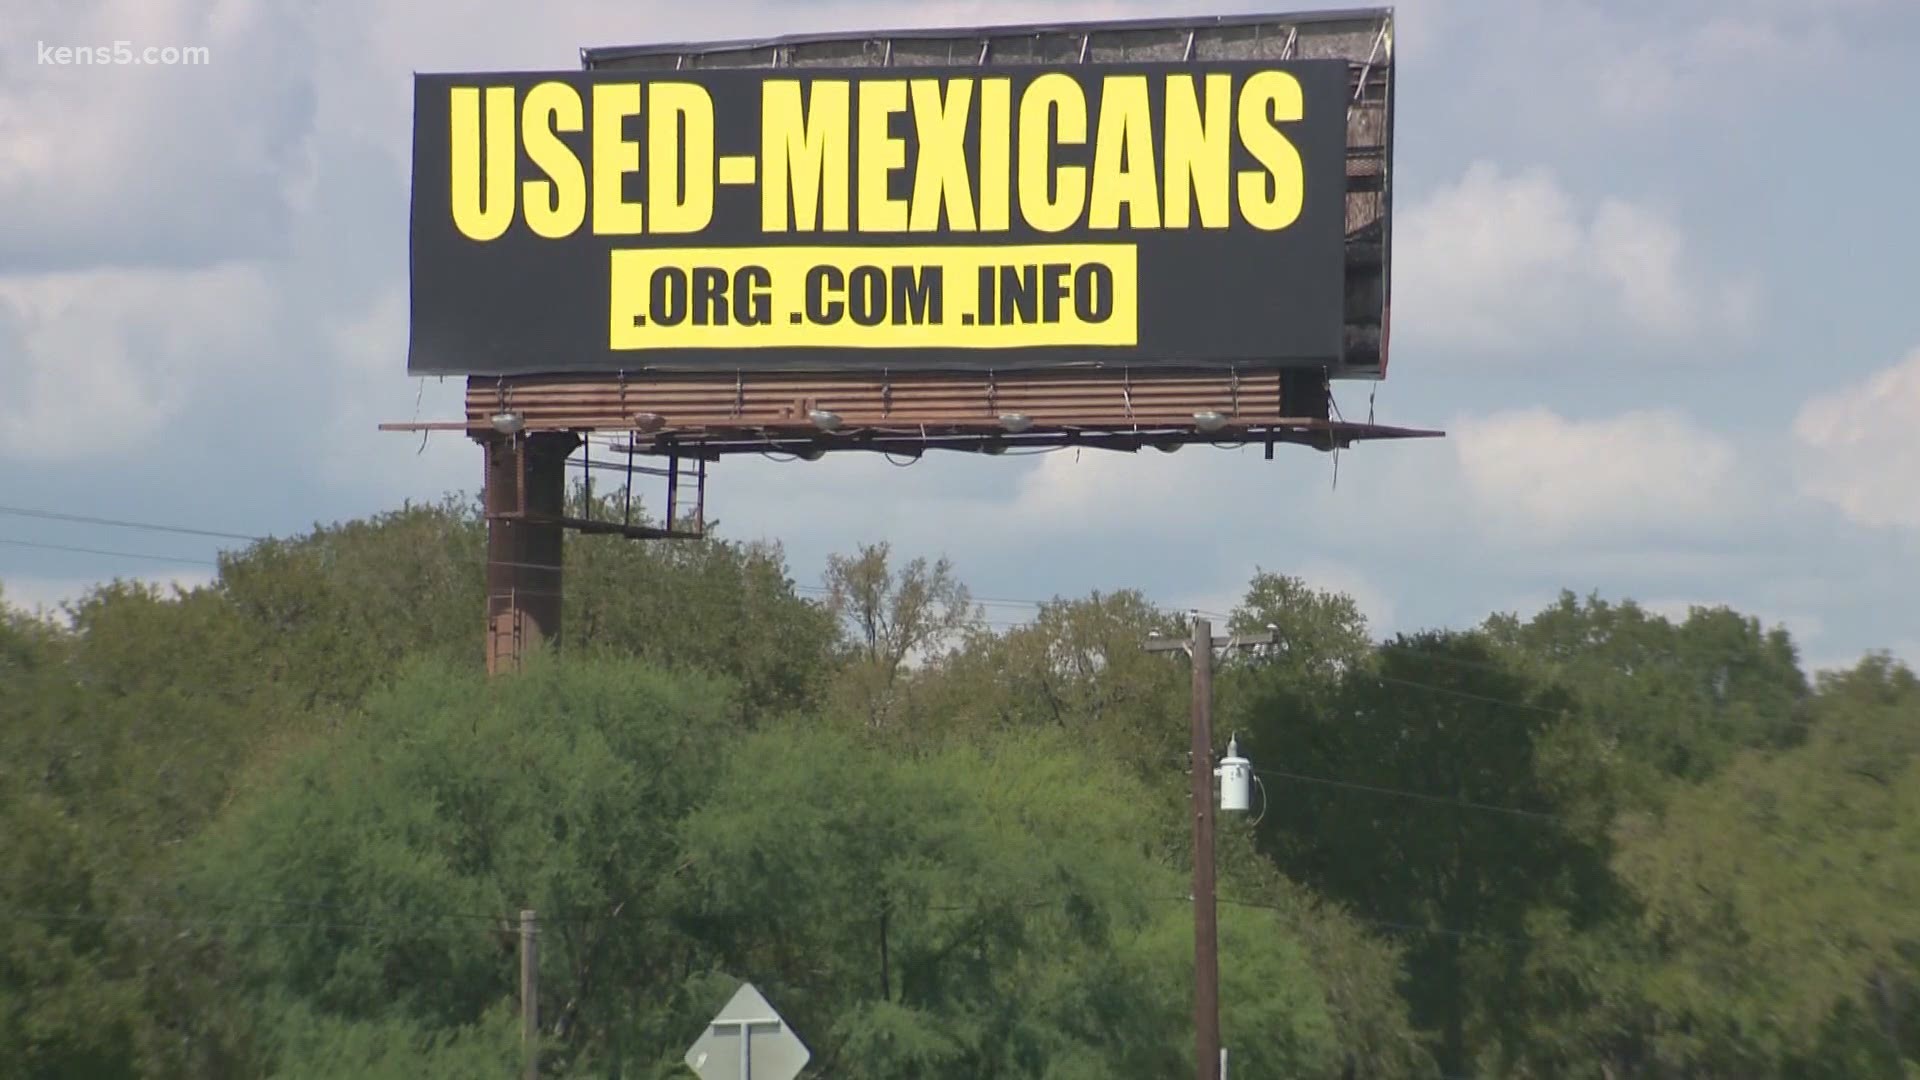 'USEDMEXICANS' billboard causes a stir in south Texas